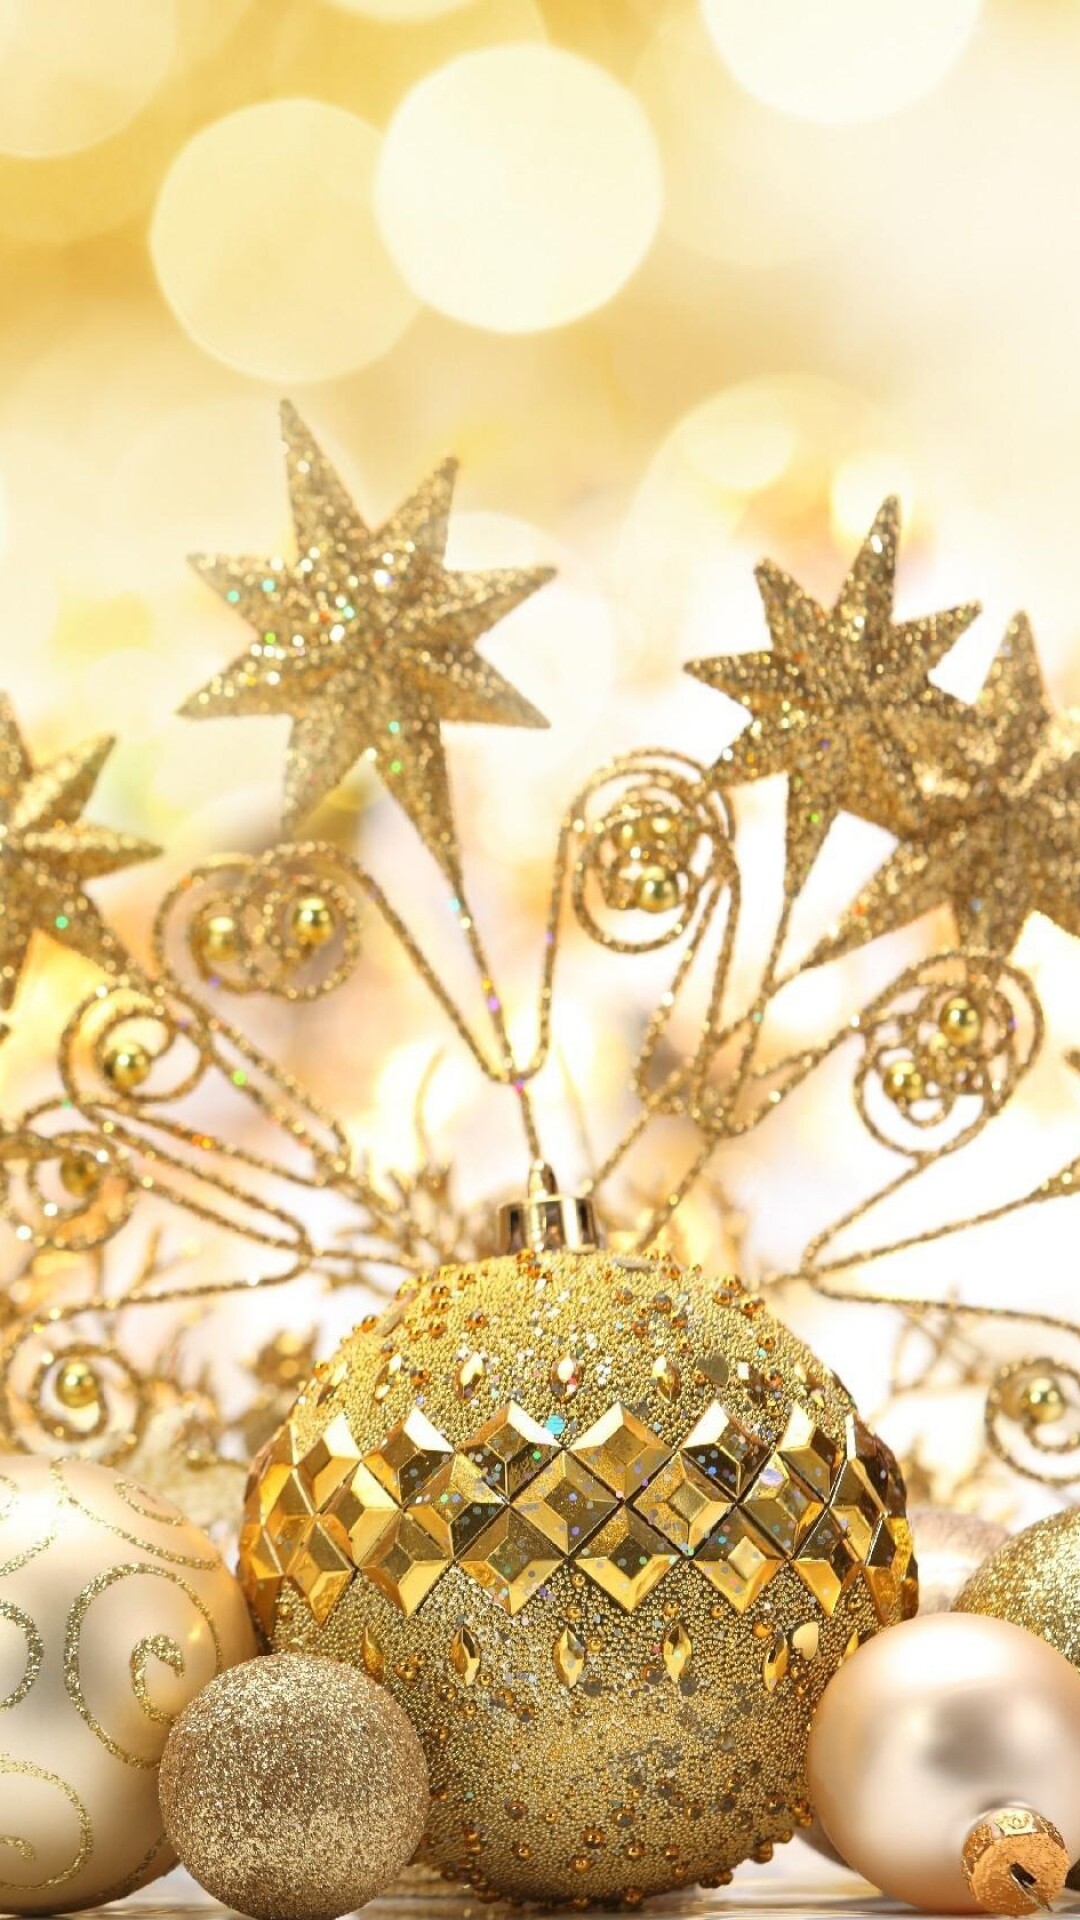 Gold Star: A personalized Christmas bauble, Glitter Xmas tree's decoration, Stars ornaments. 1080x1920 Full HD Wallpaper.